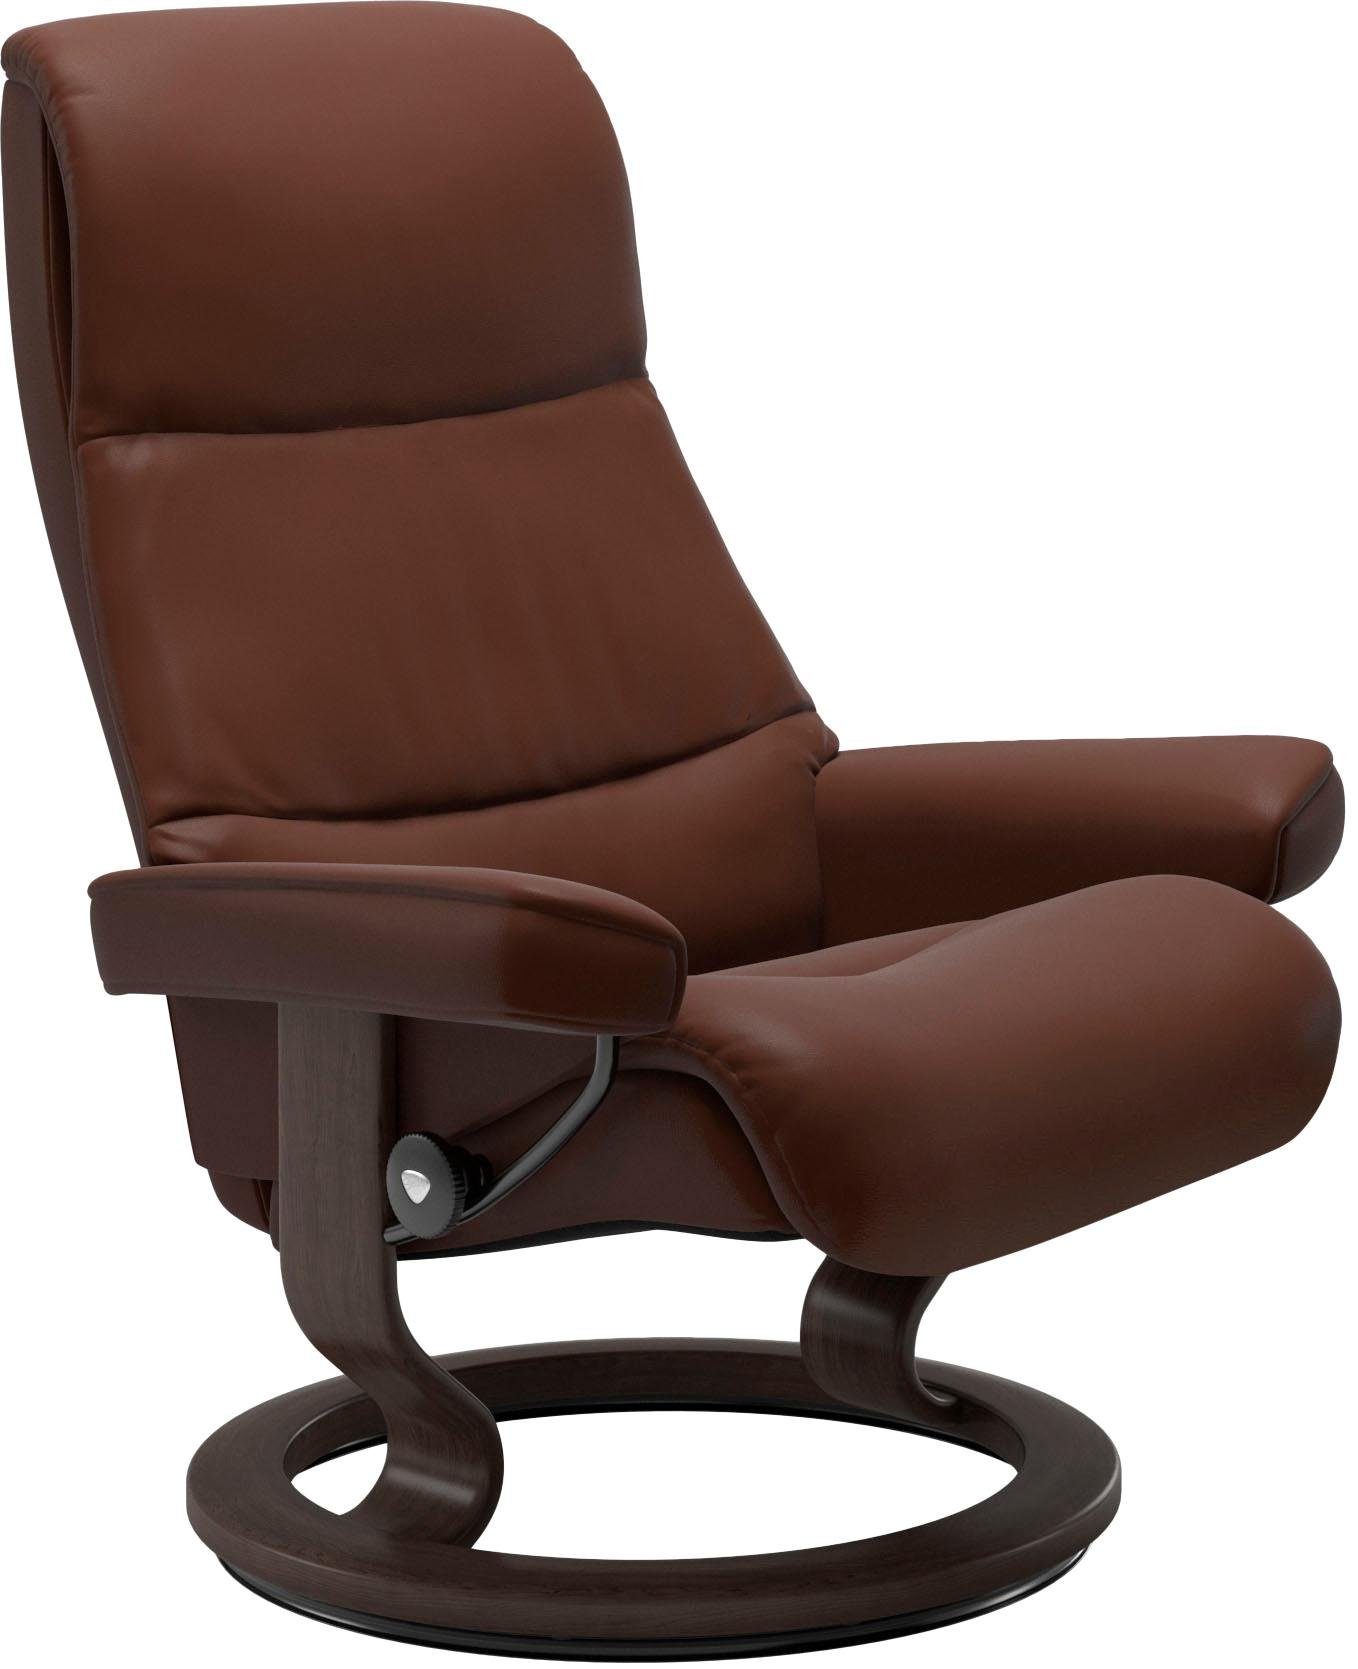 Stressless® View, Base, Relaxsessel mit Größe Wenge Classic S,Gestell